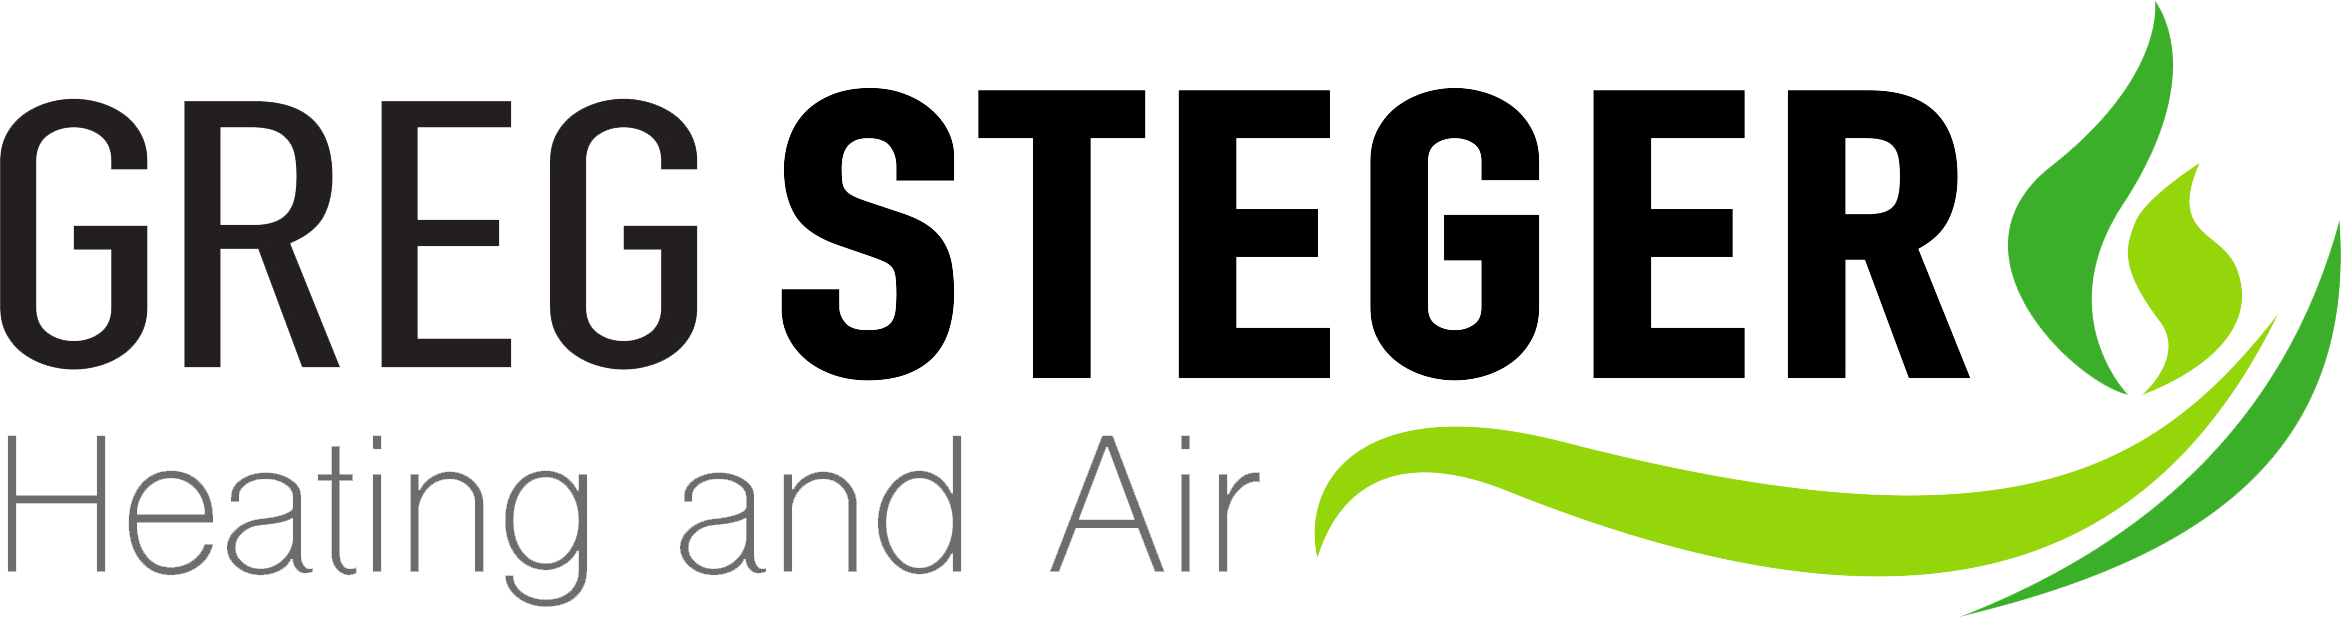 Greg Steger Heating and Air! Your go to for AC and Heat Pump repair in Sheboygan WI!